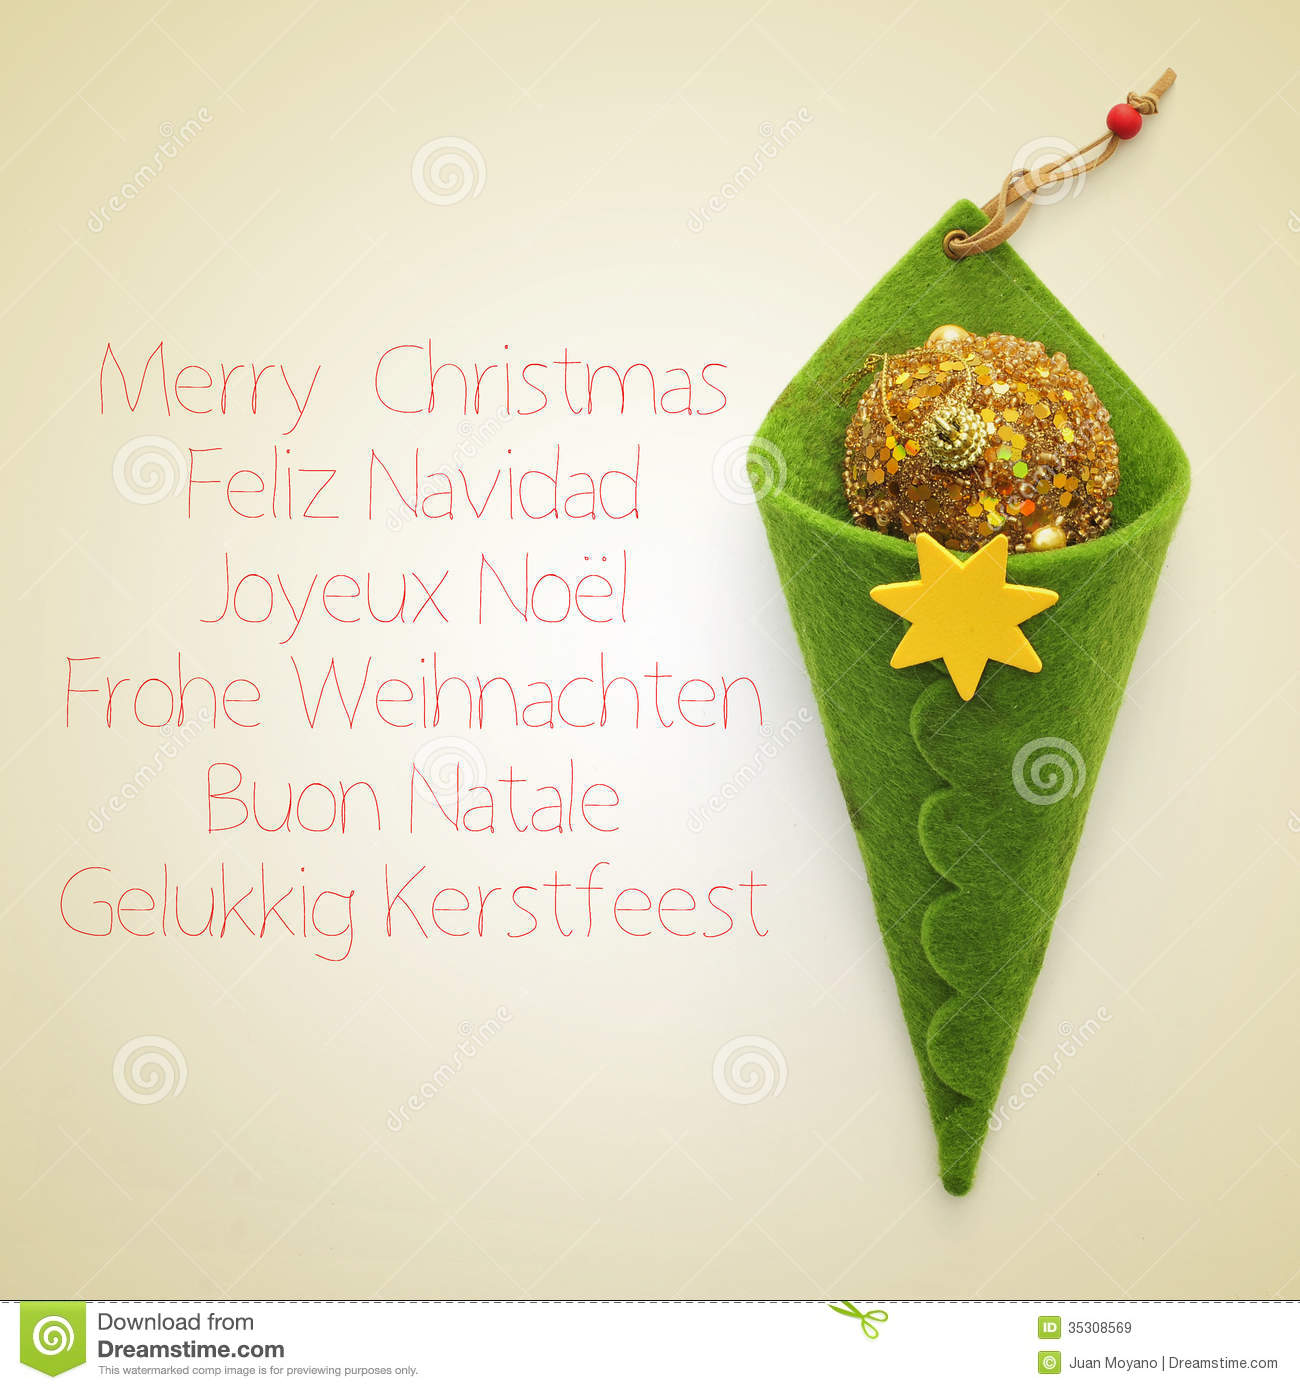 Merry Christmas In Different Languages Royalty Free Stock Images